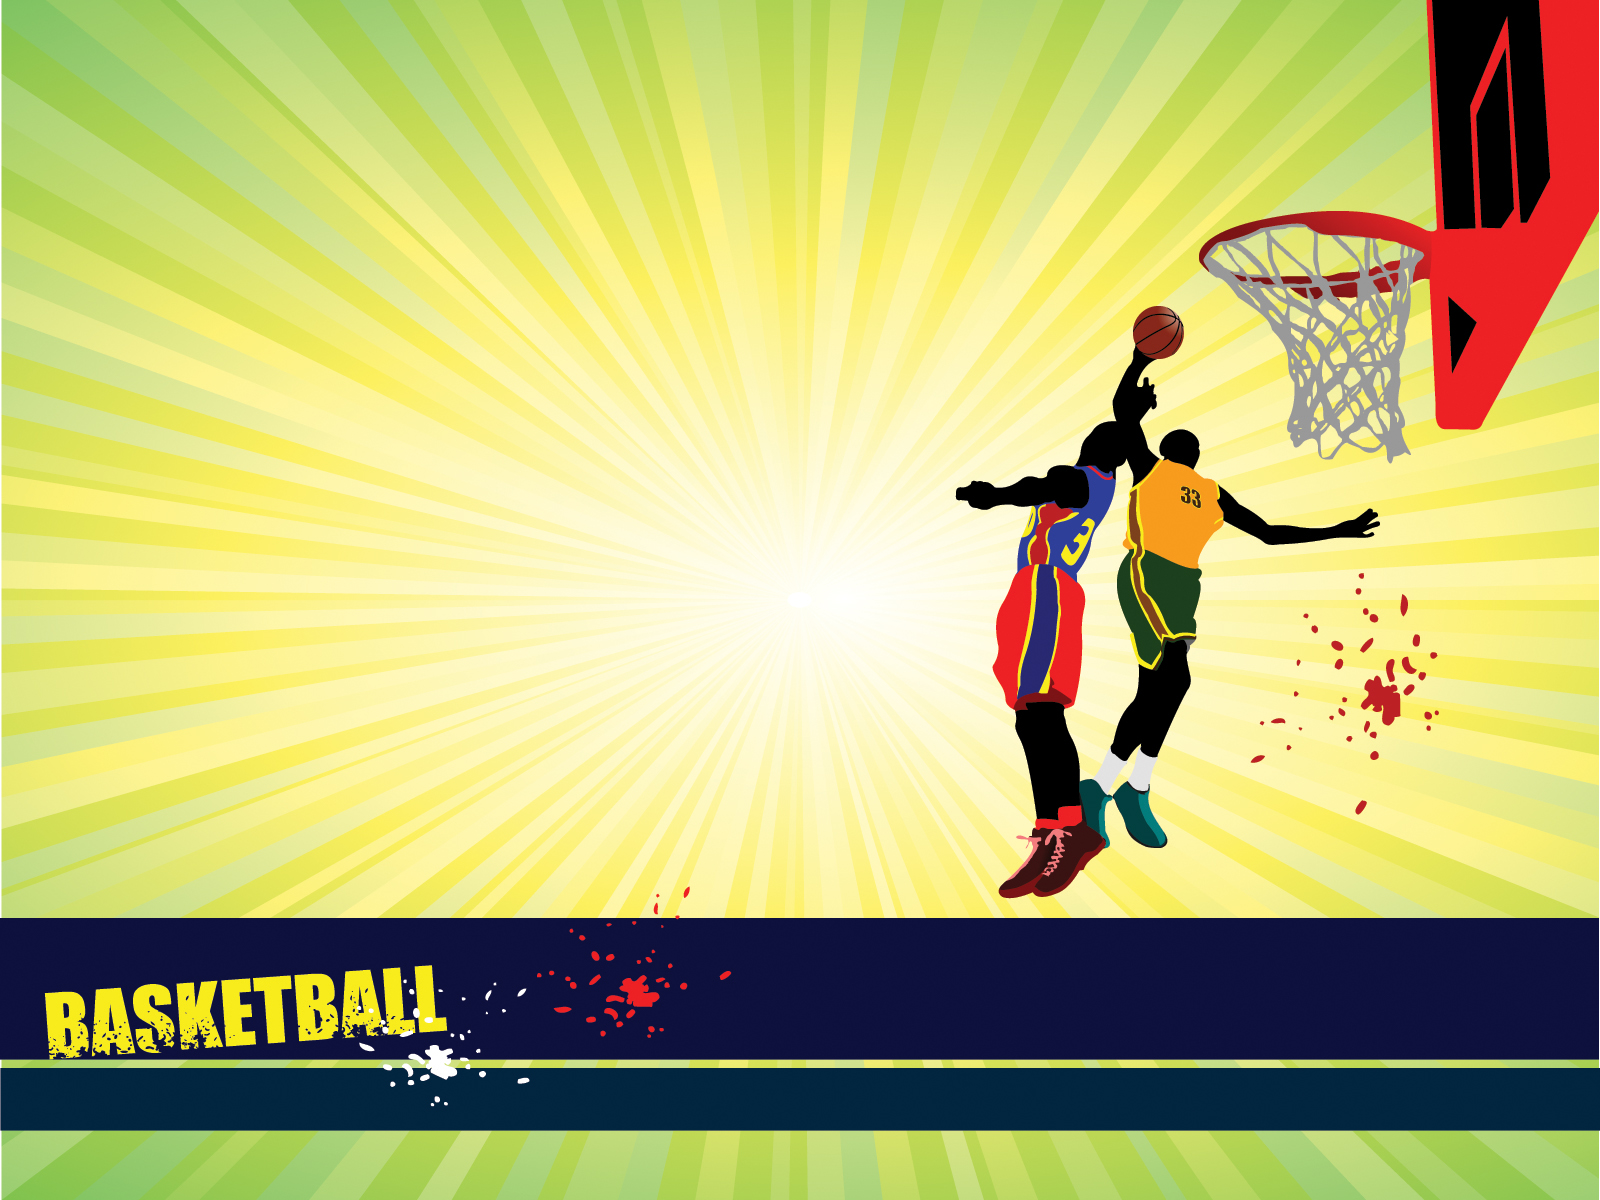 Sports Basketball Powerpoint Templates - Blue, Red, Sports, Yellow - Free  PPT Backgrounds and Templates